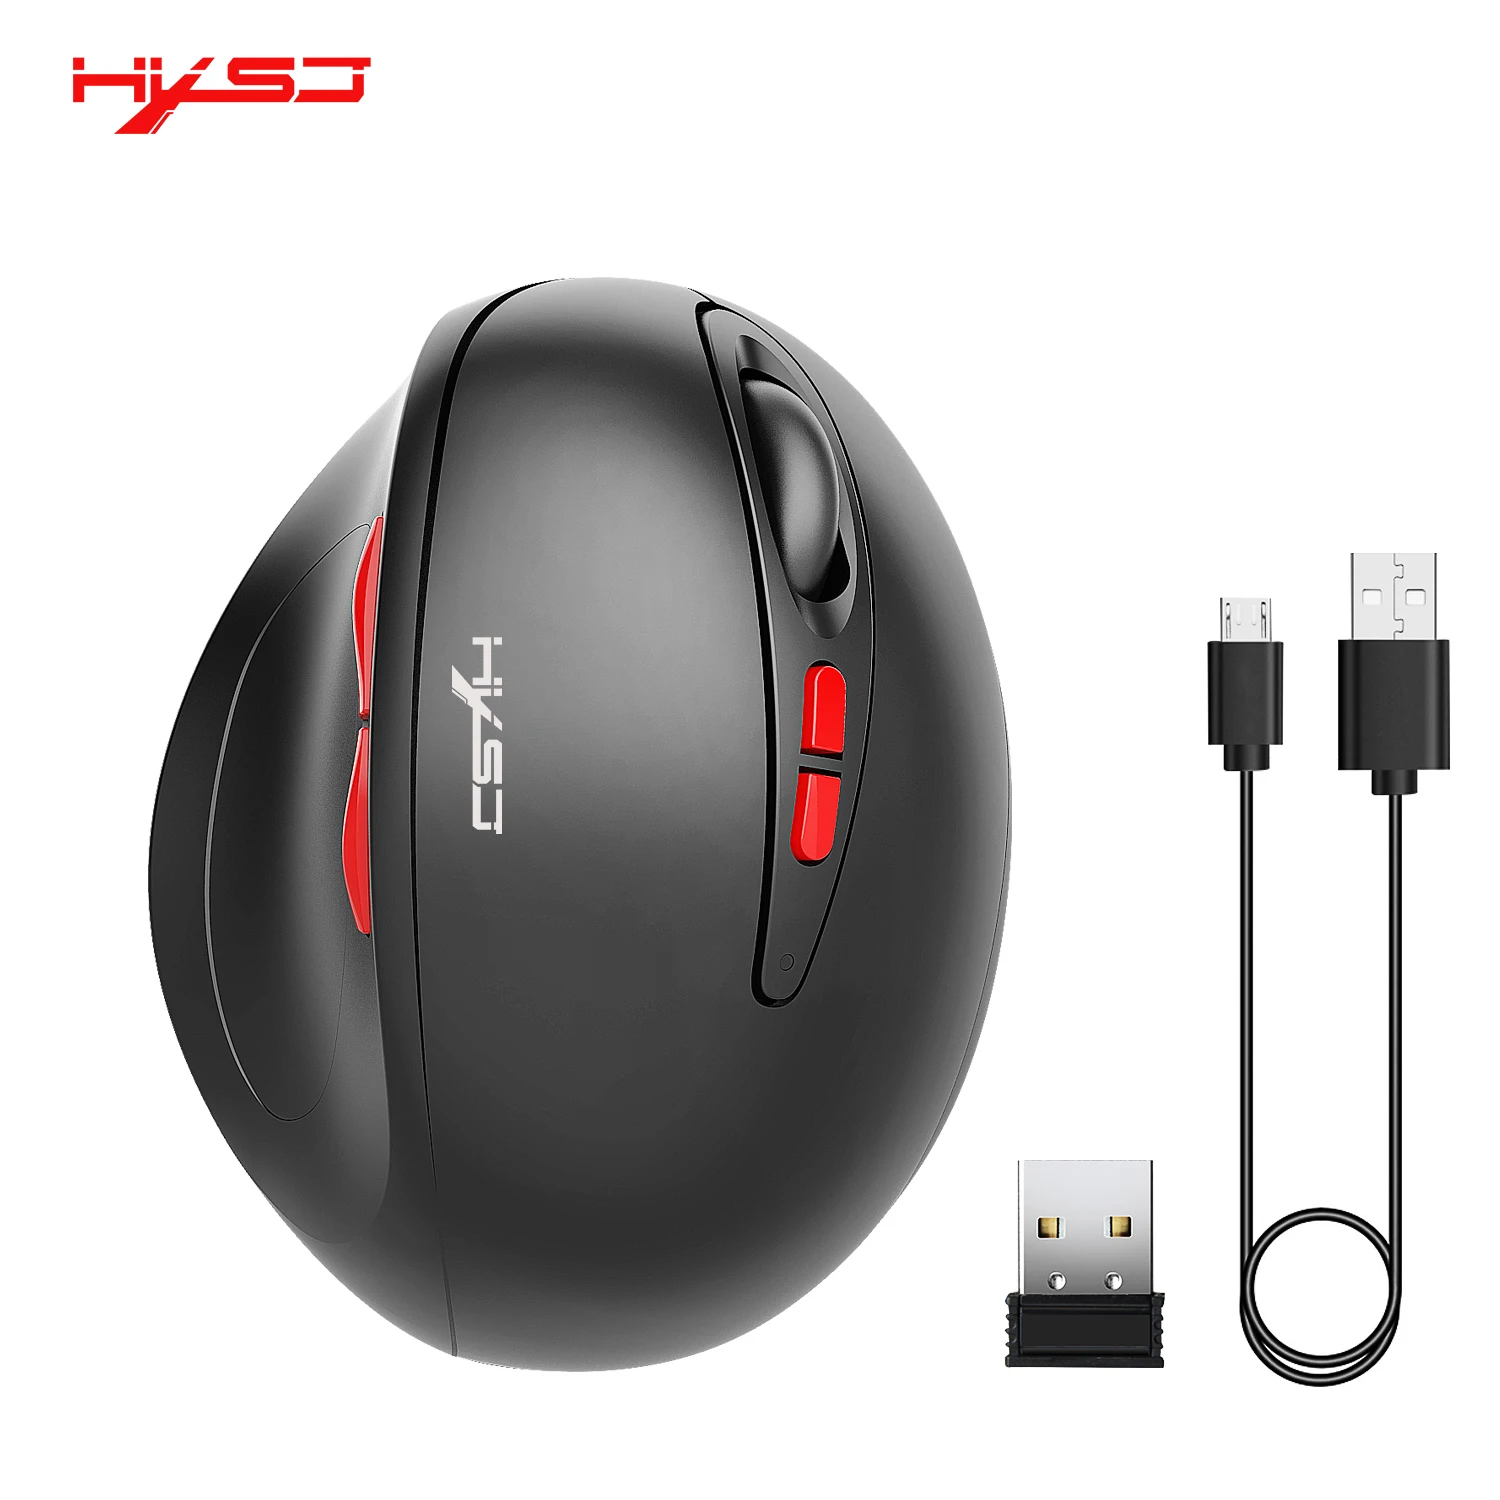 

HXSJ Wireless Mouse 2.4GHz USB ABS Optical Game Mouse 4 Buttons Ergonomics Design Desktop Vertical Mouse 2400DPI For Office Home